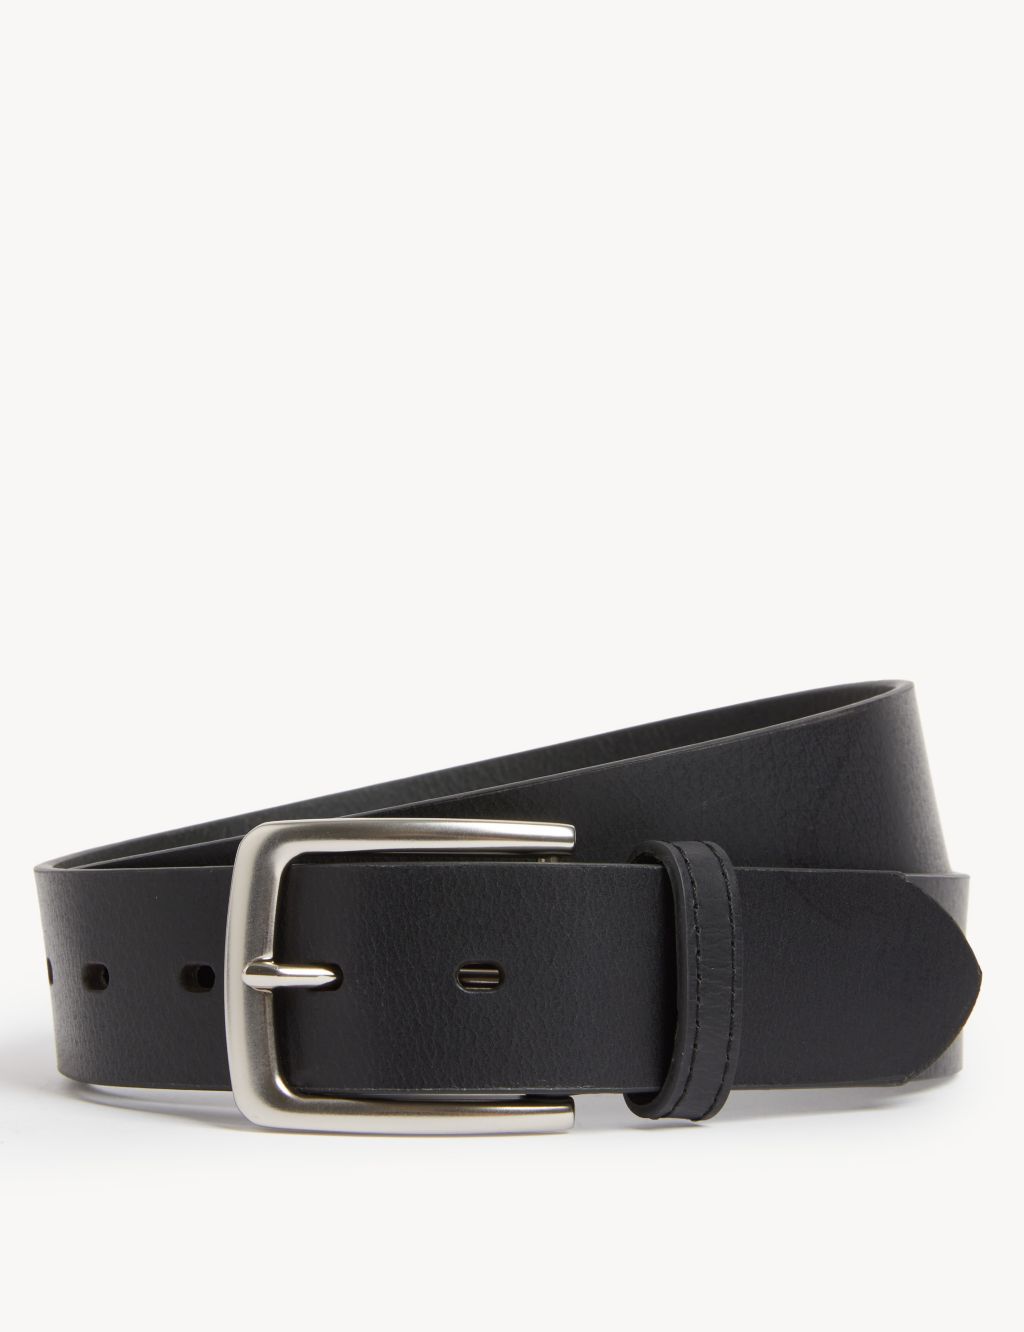 Leather Casual Belt image 1